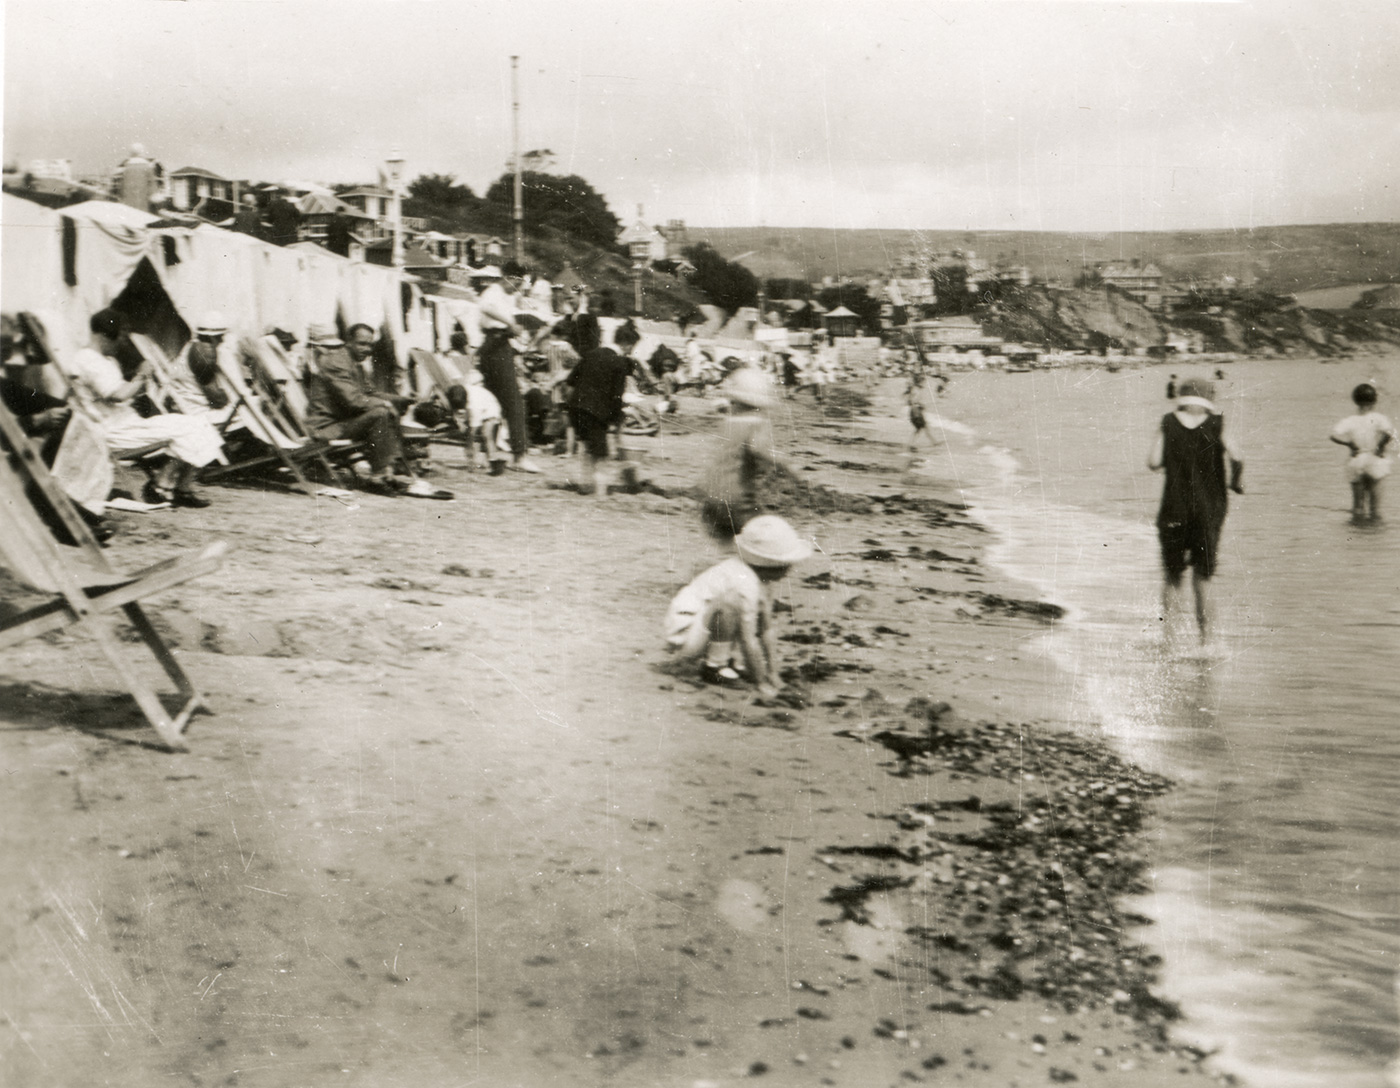 Children and Families on the Beach